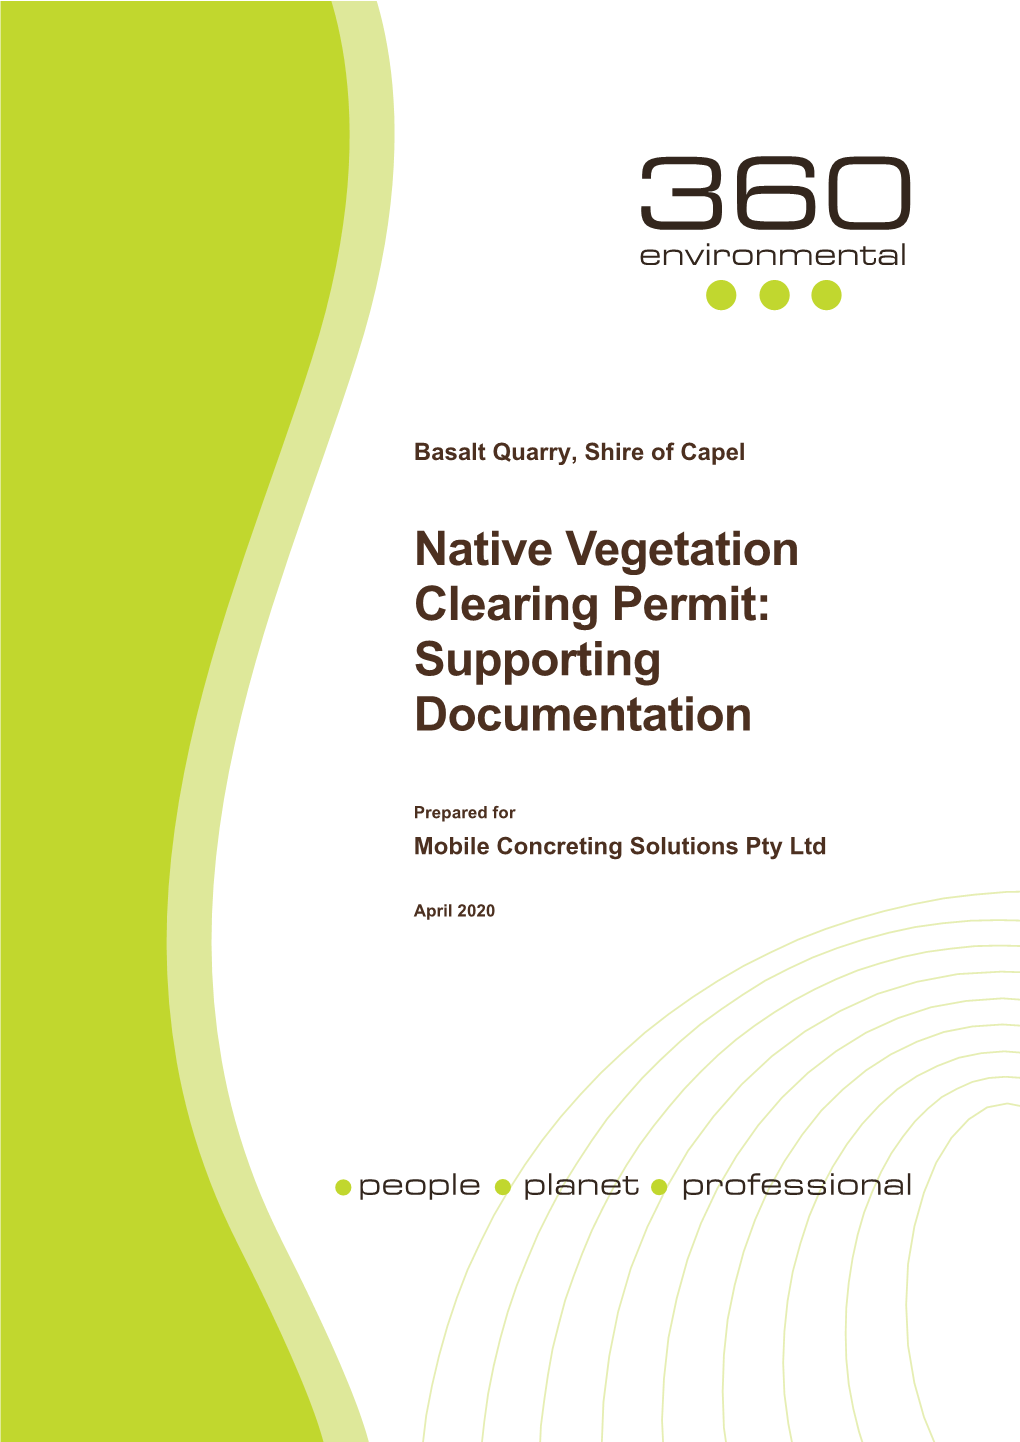 Native Vegetation Clearing Permit: Supporting Documentation